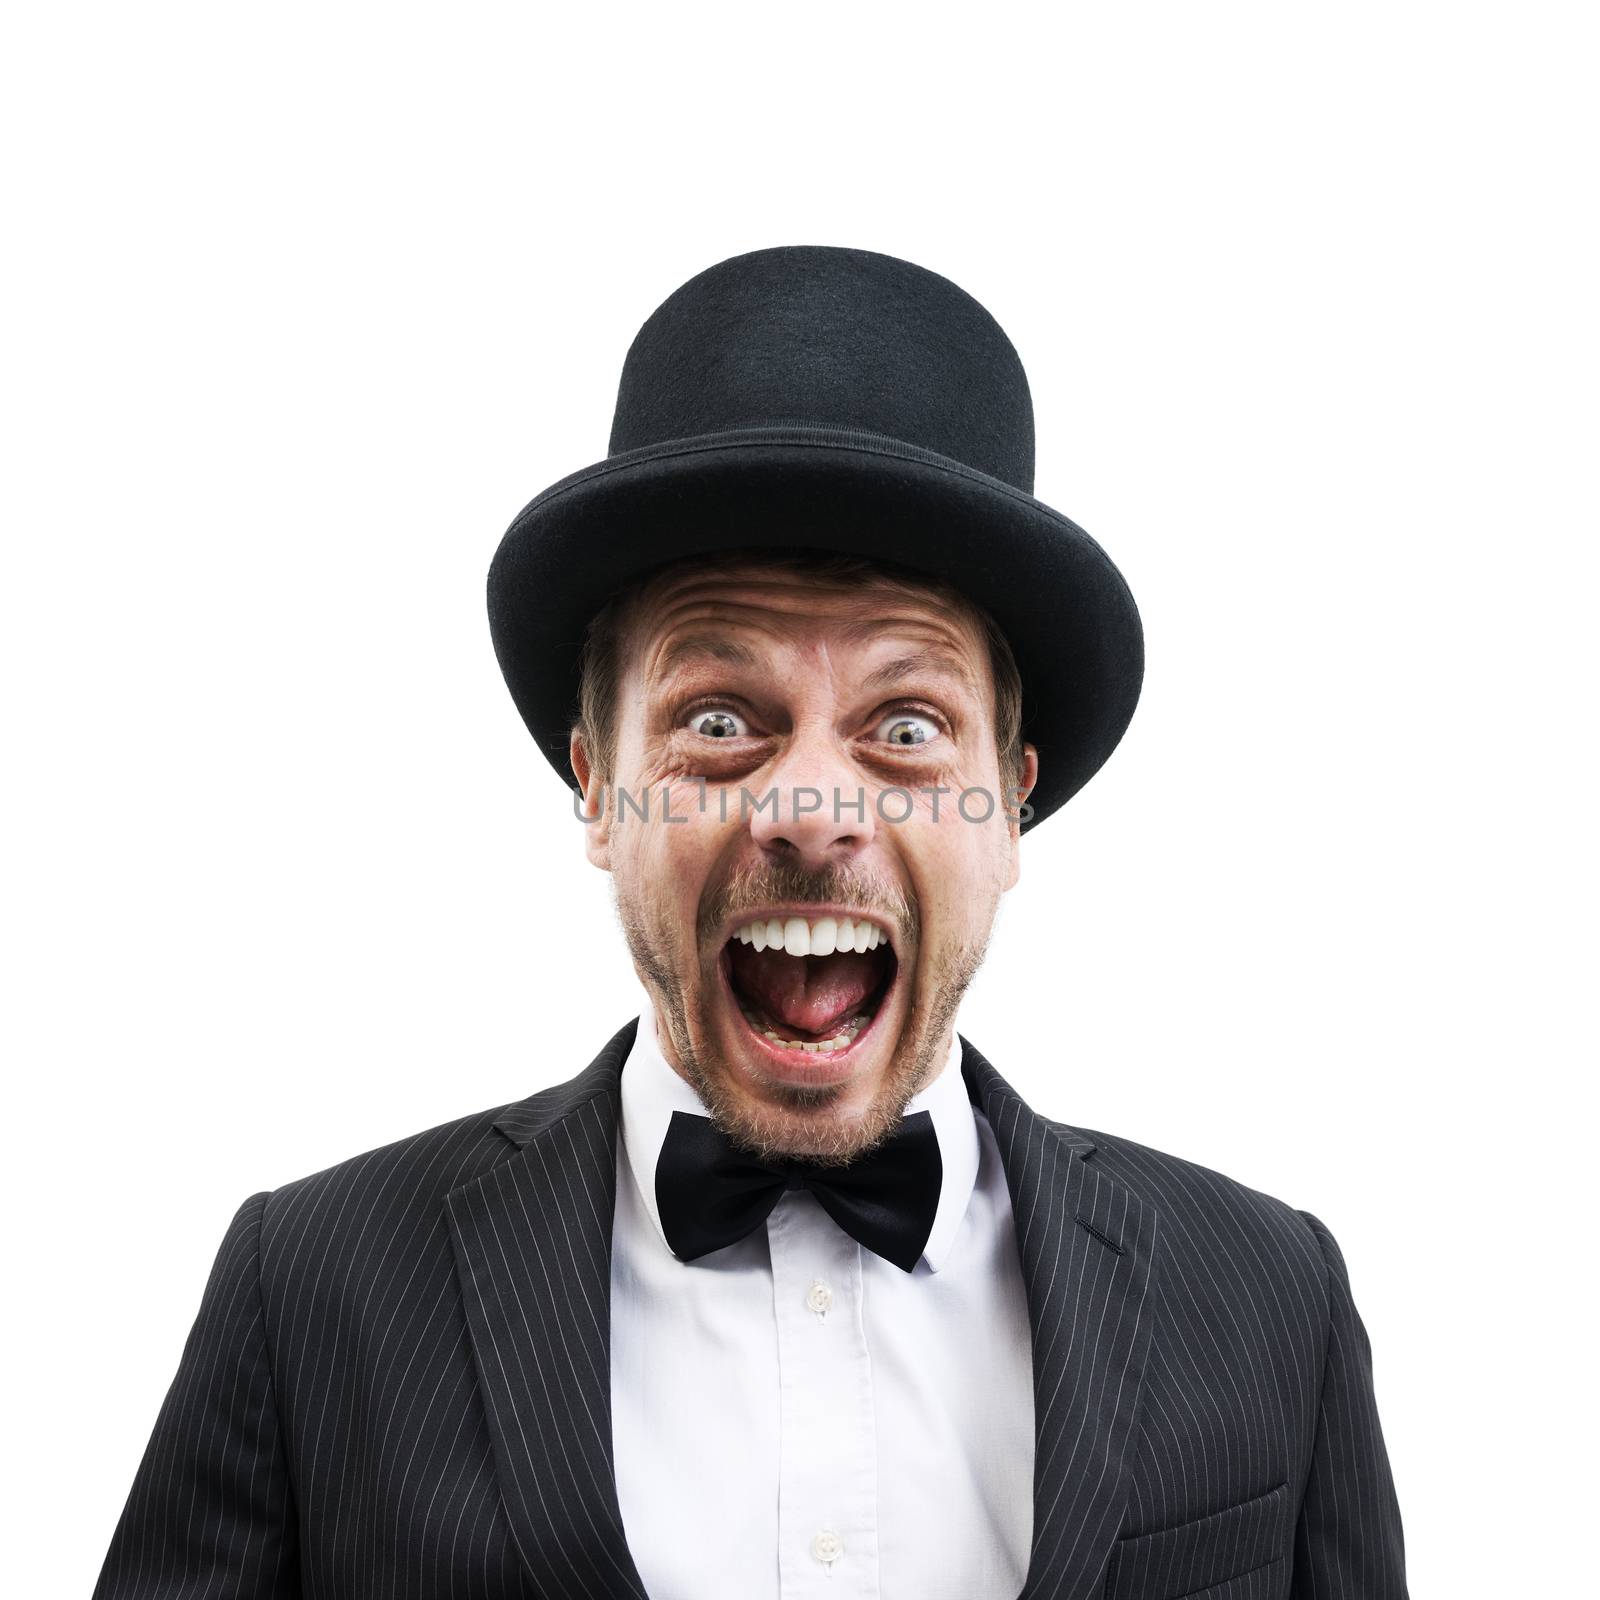 Vintage gentleman with bowler hat and bow tie screaming at camera.